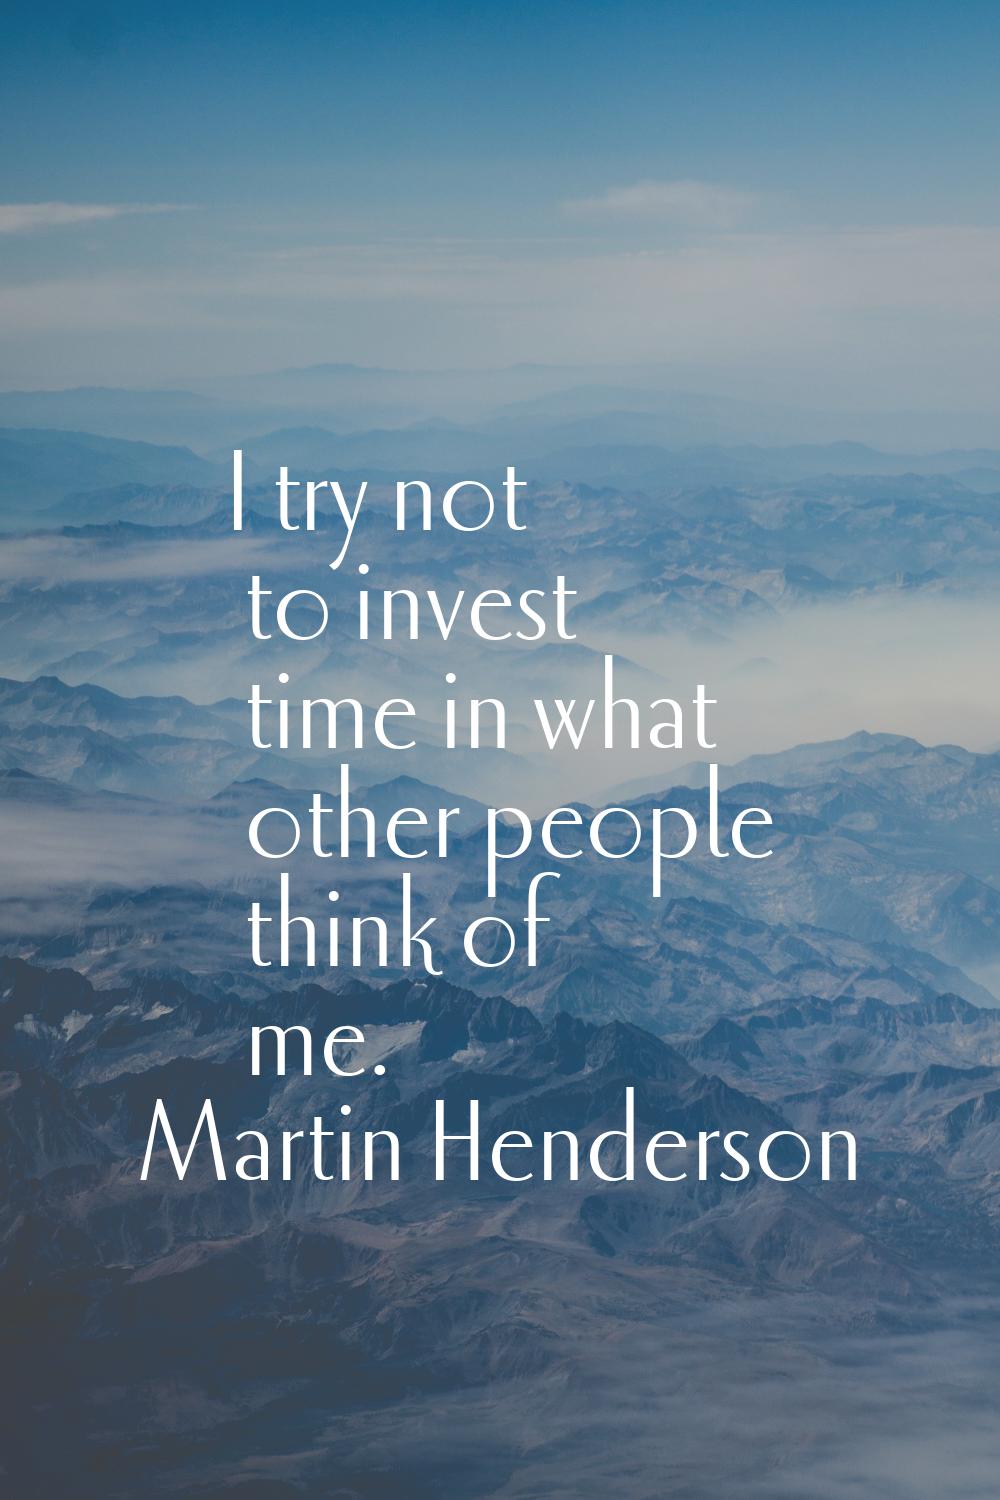 I try not to invest time in what other people think of me.